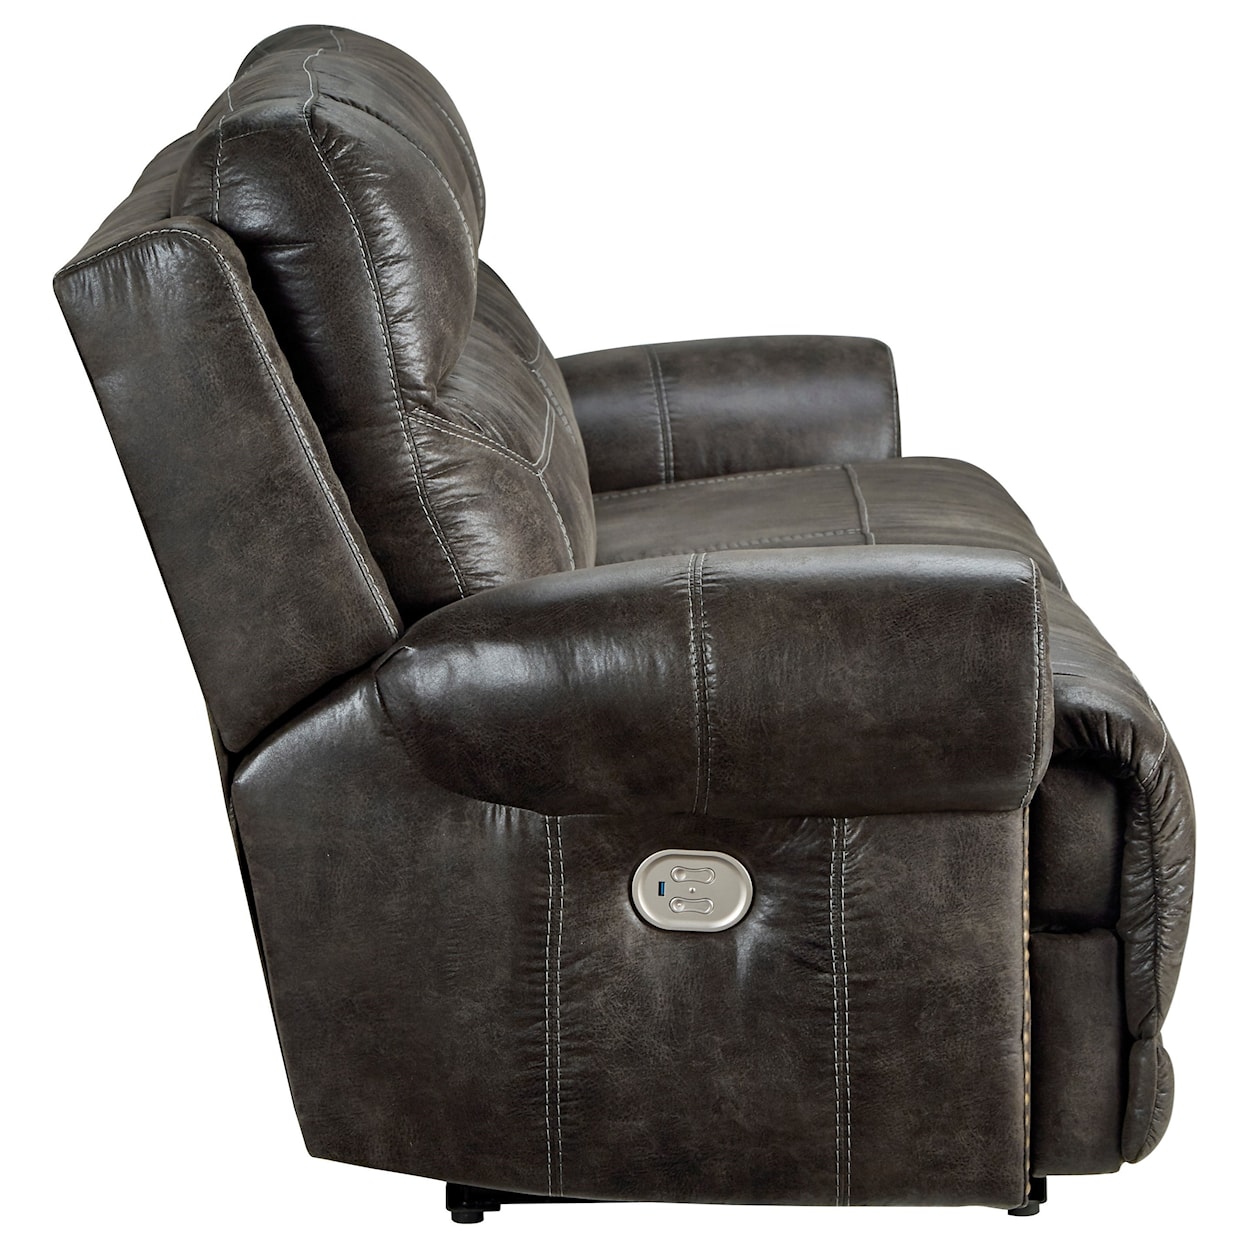 Ashley Signature Design Grearview Power Reclining Sofa